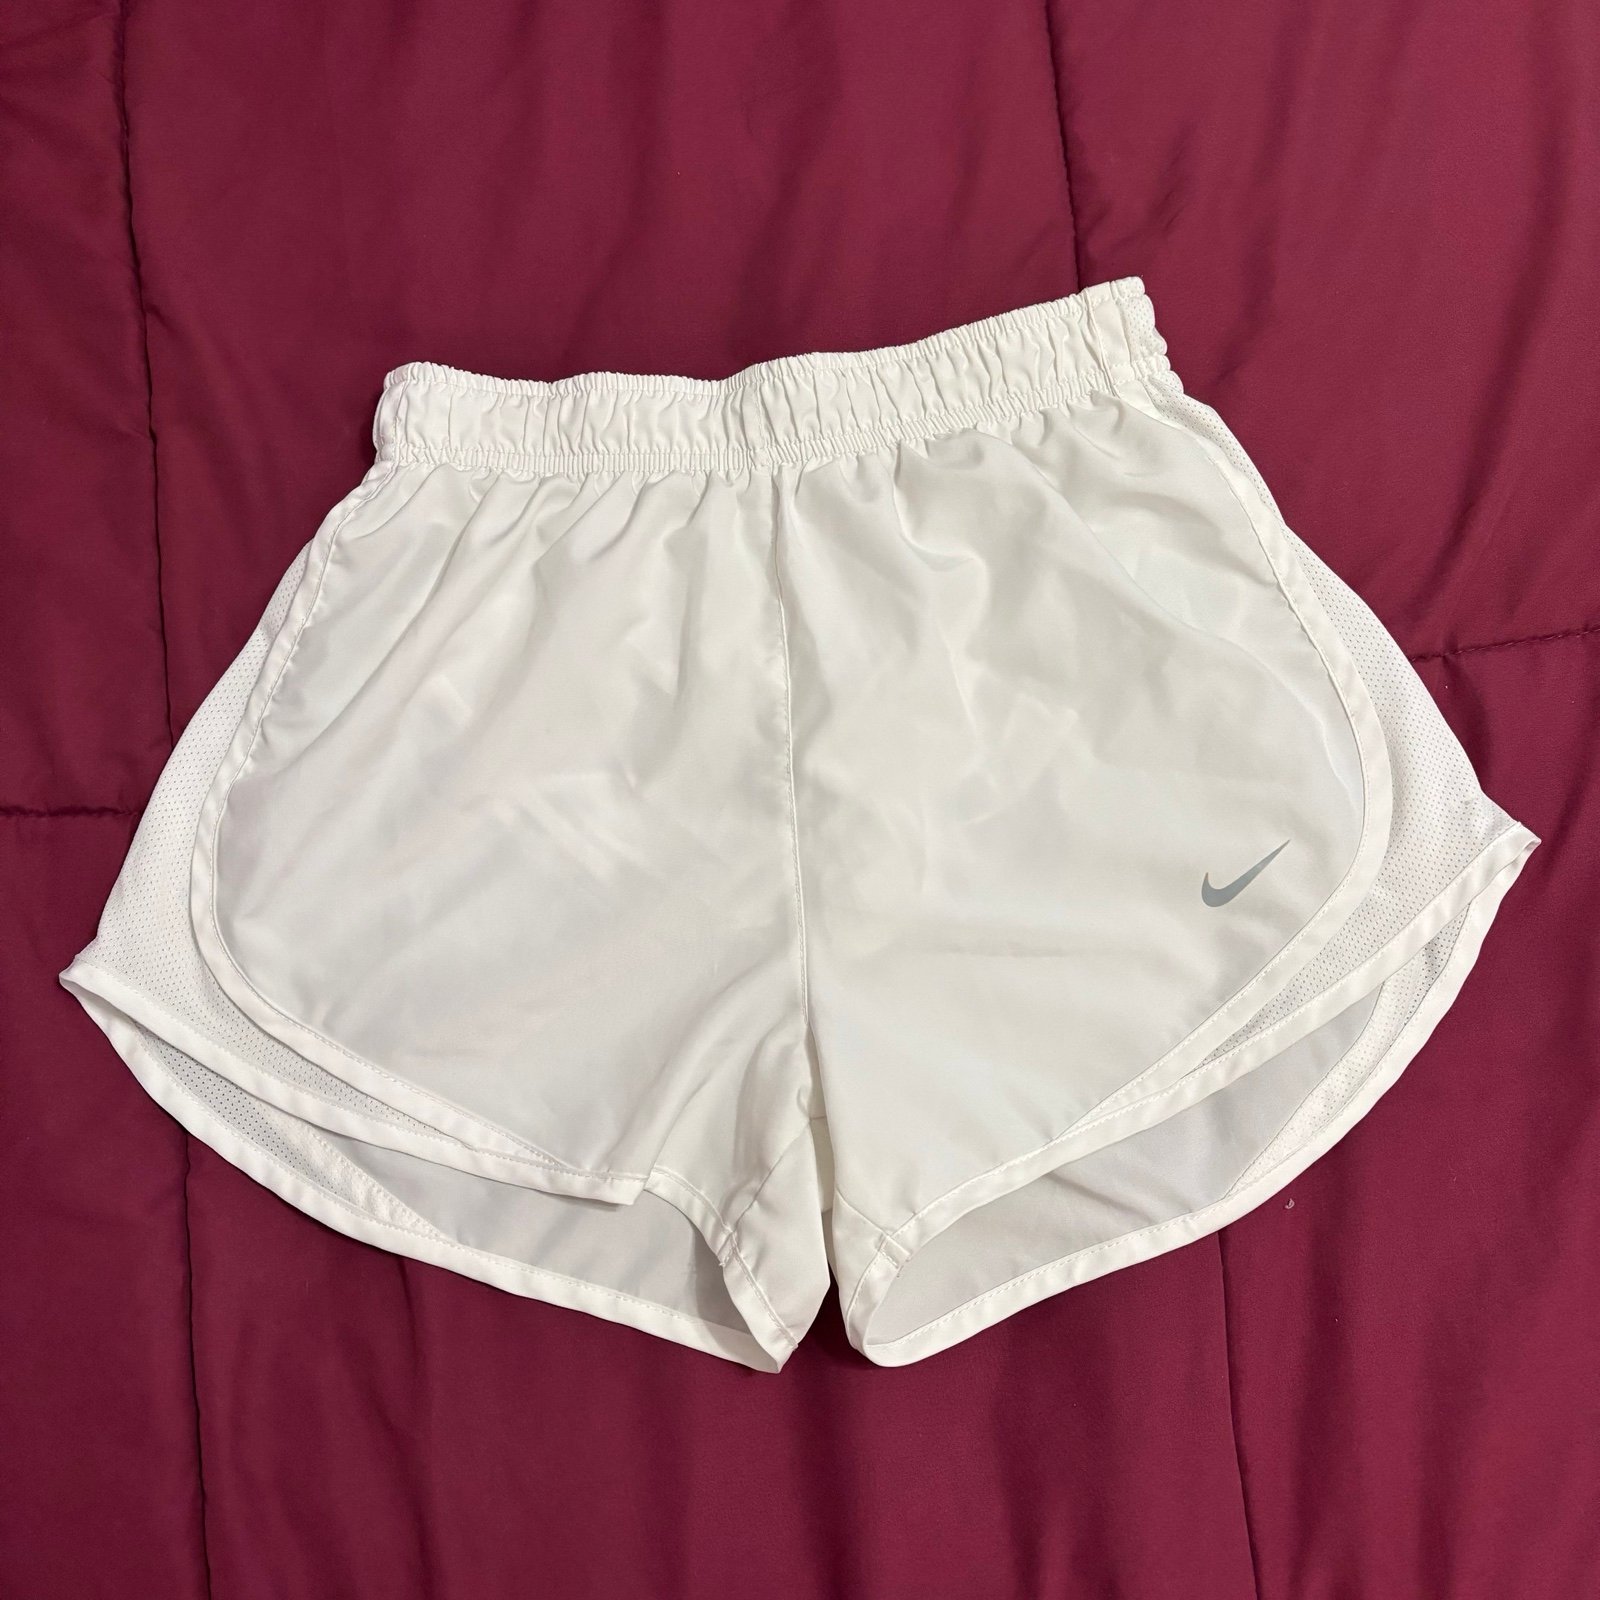 the Lowest price Nike Dri fit white shorts ow5ybOfMY just buy it